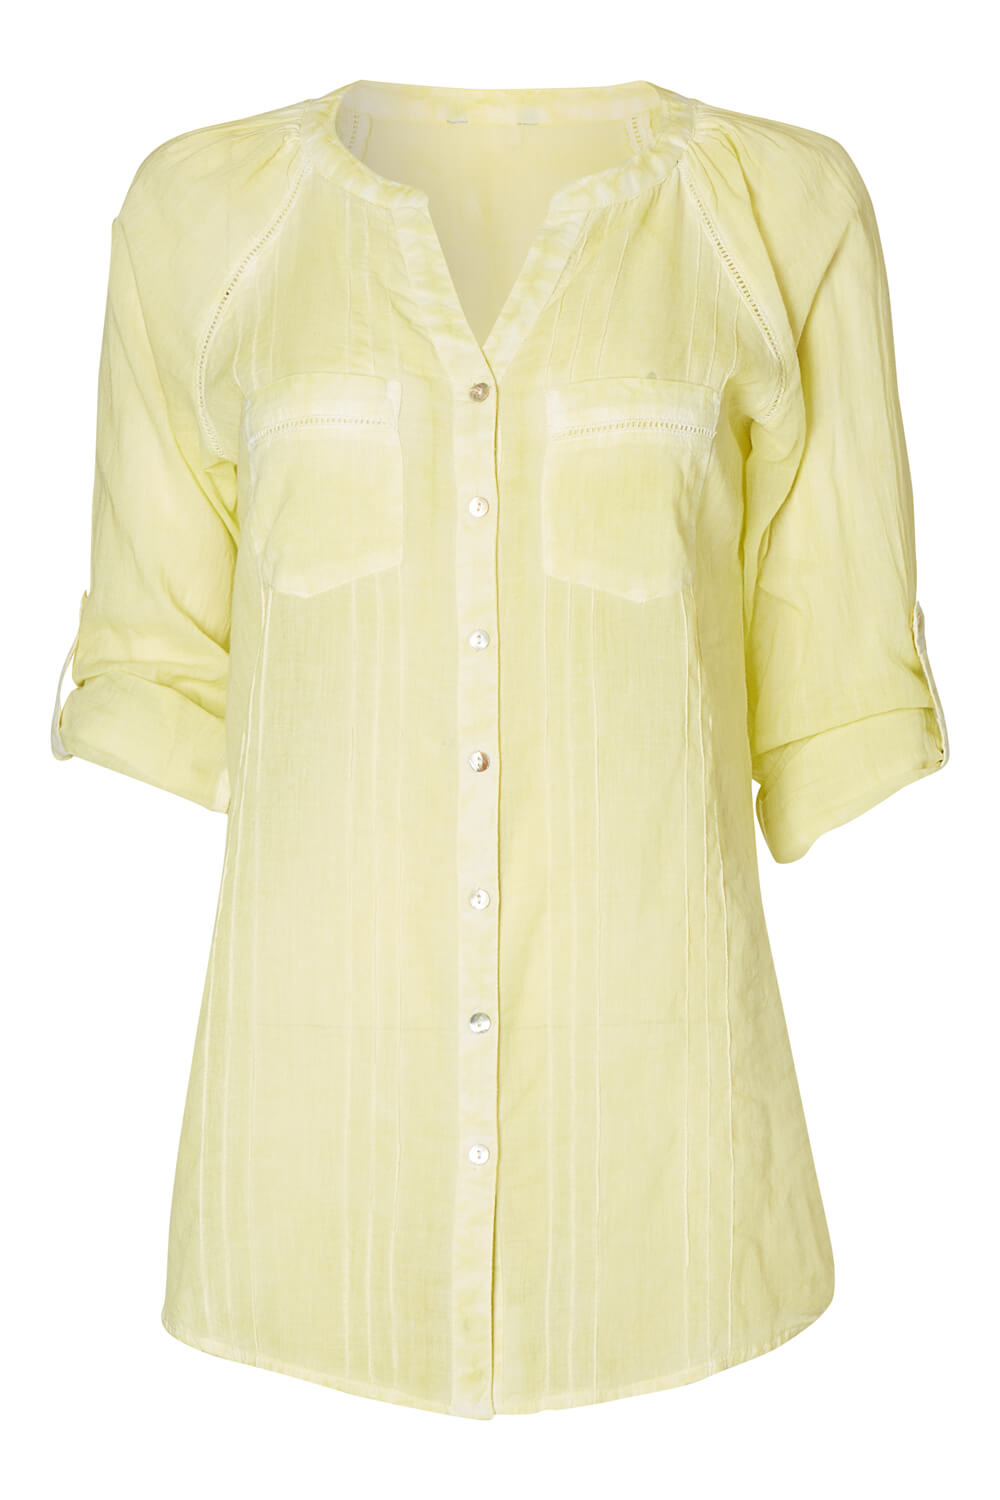 Lime Roll Sleeve Shirt, Image 4 of 4